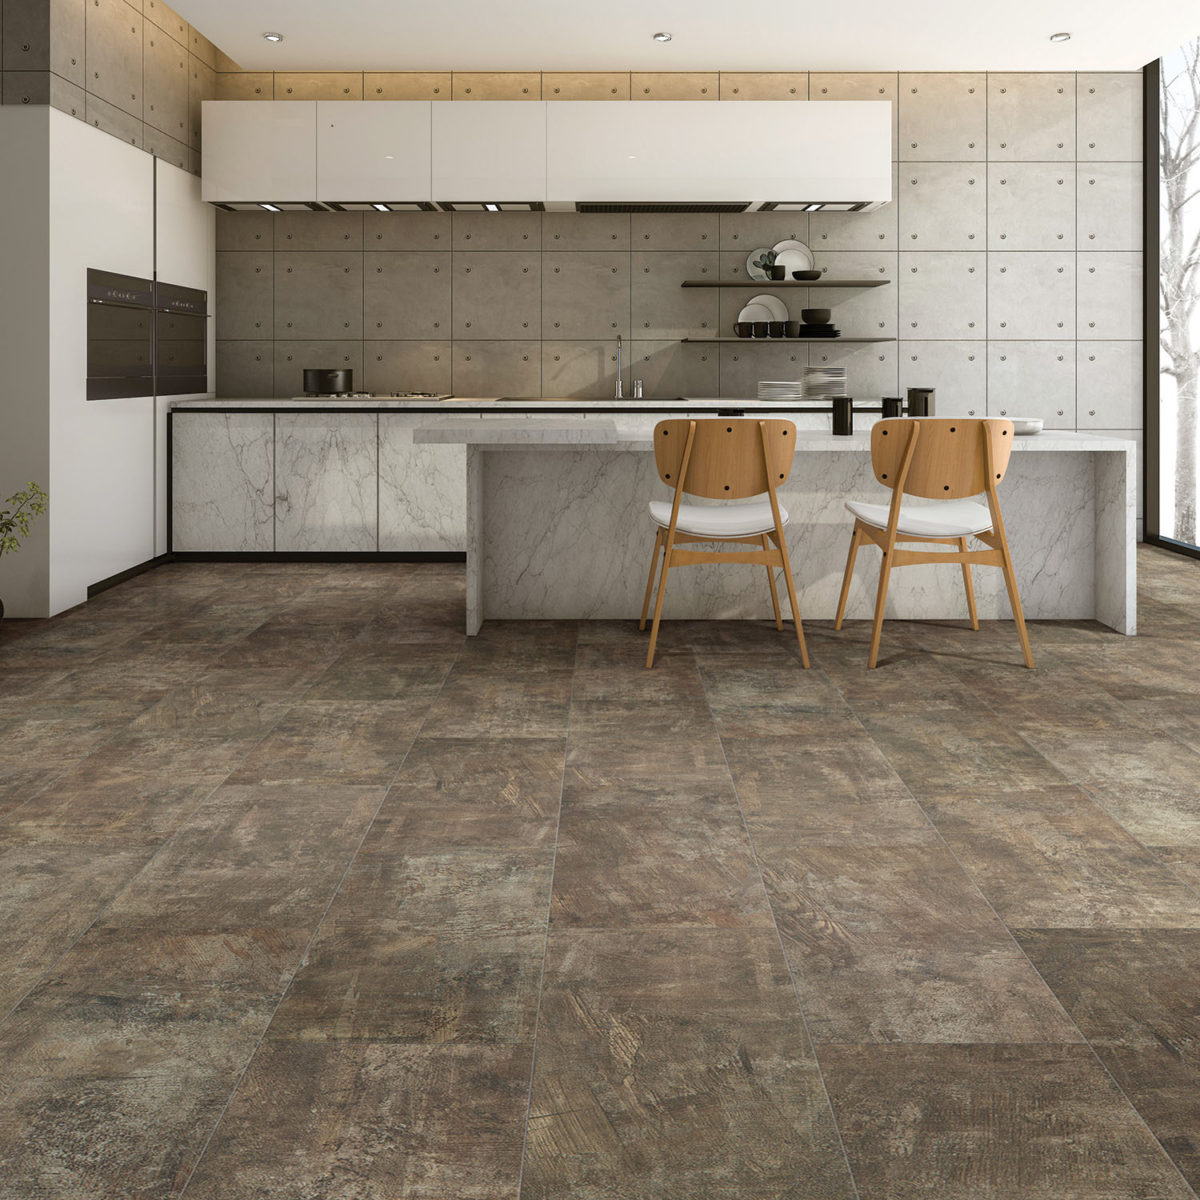 Kitchen Floors and How To Choose Your Next One